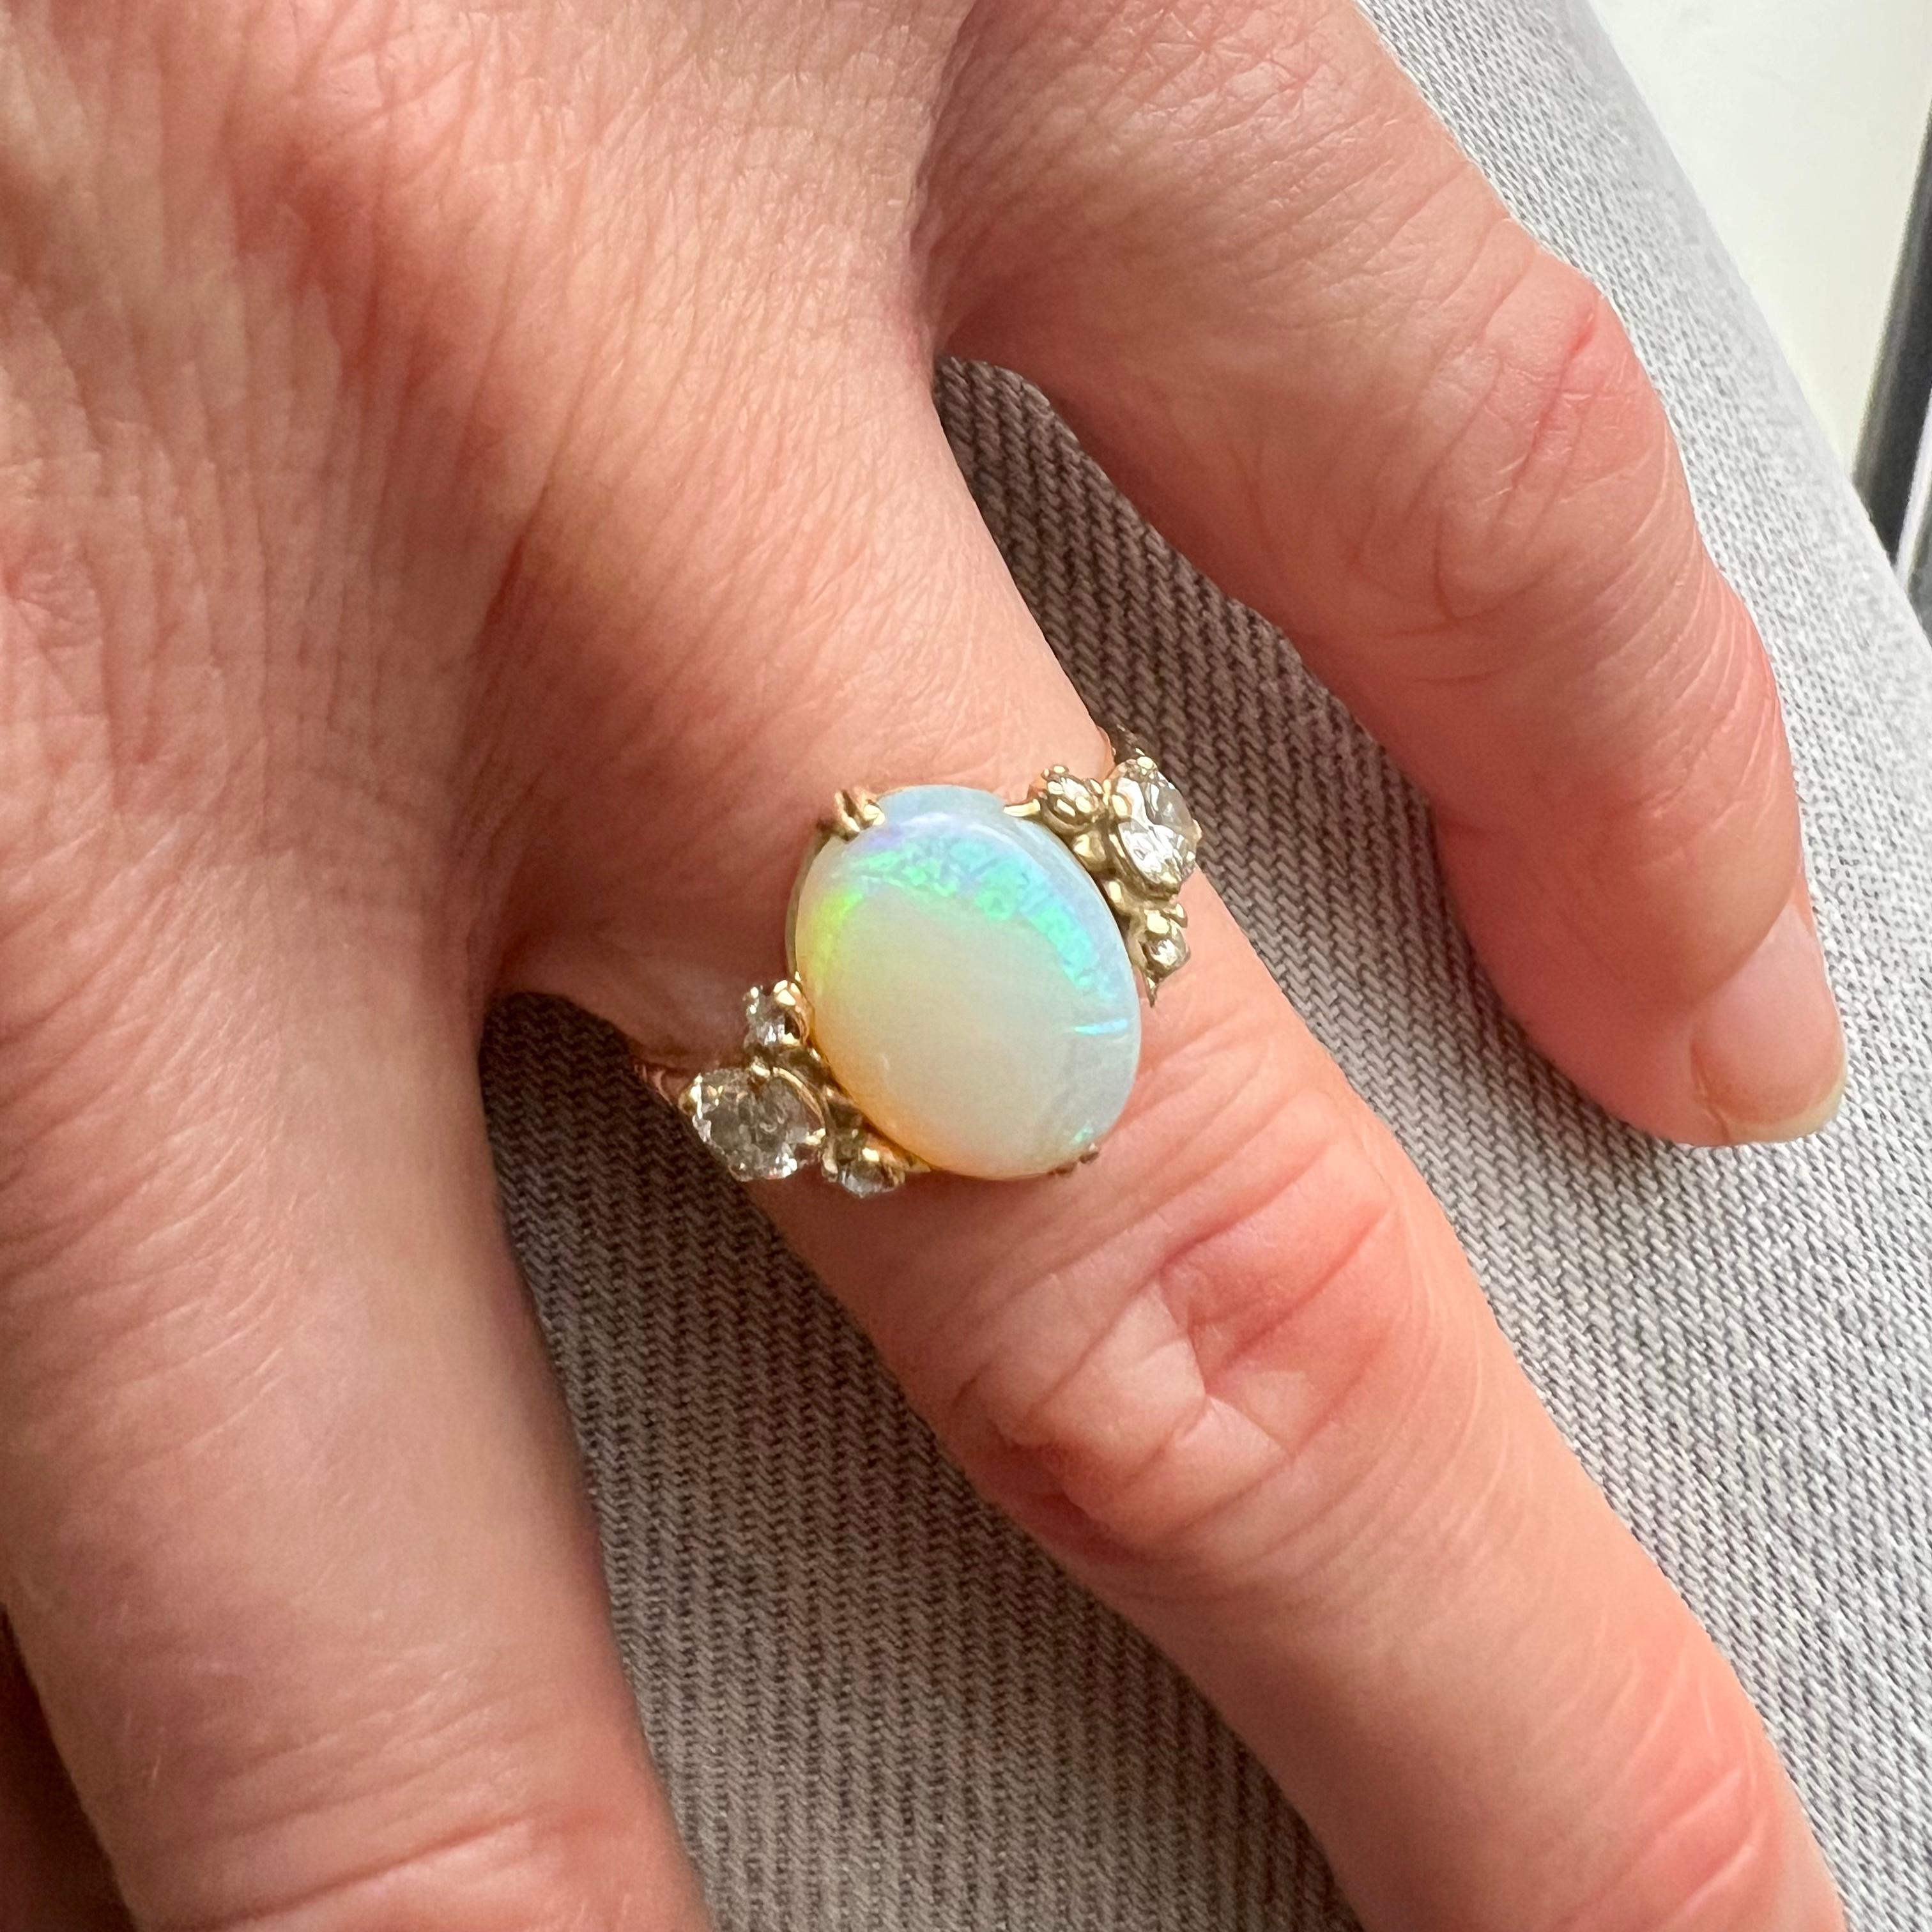 This Art Deco opal and diamond ring features a glowing crystal white oval opal created with a trio of bright white brilliant cut diamonds on either side of this beautiful ring. The shank of the ring is made of 14 karat yellow gold and crafted with